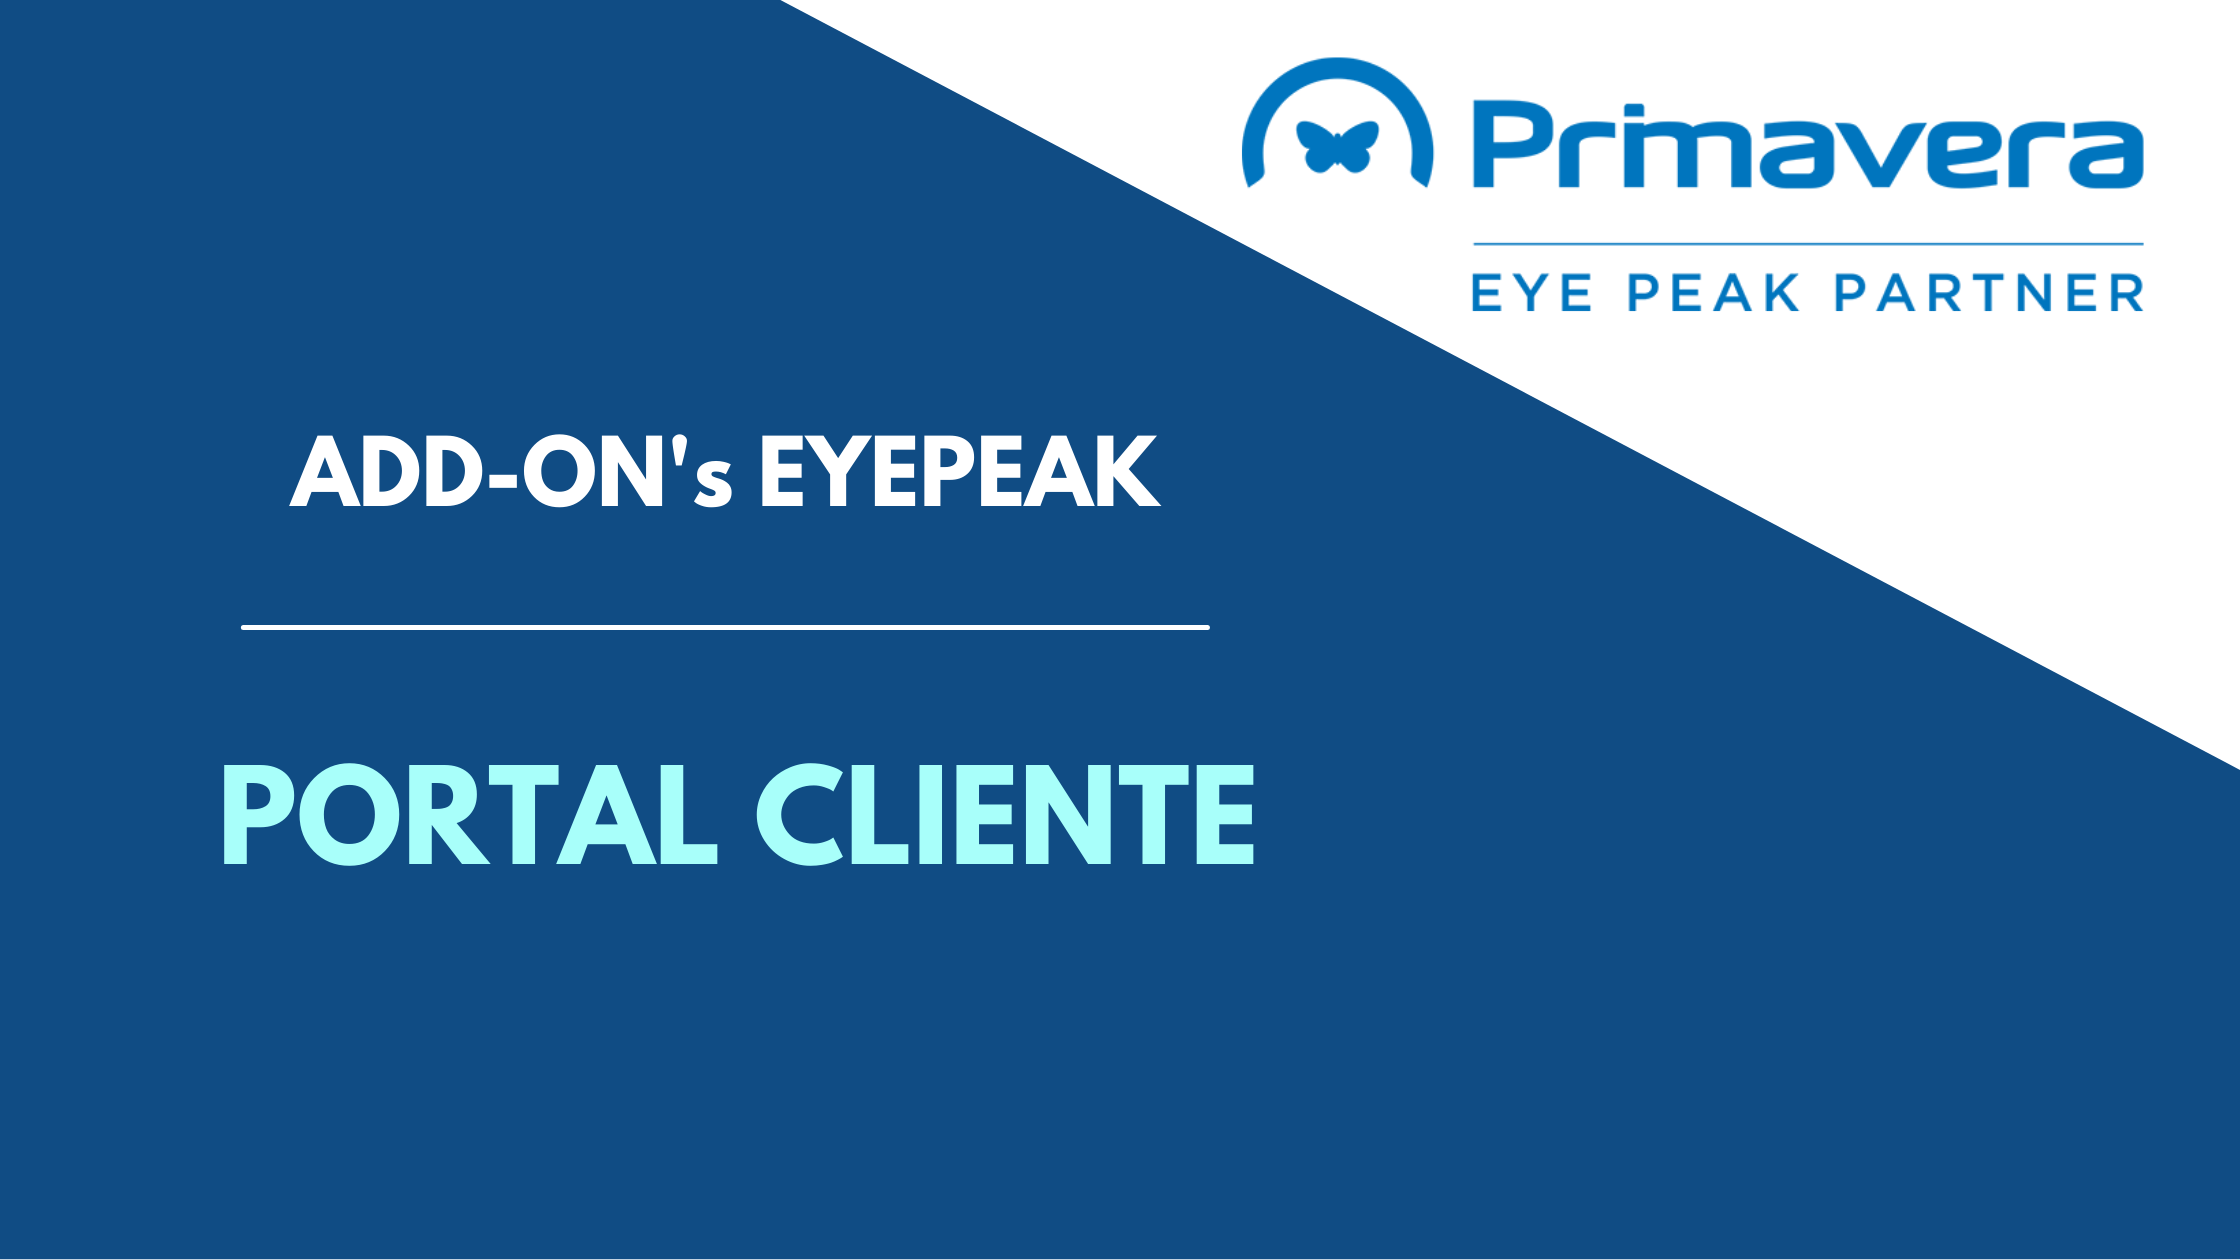 You are currently viewing Eyepeak – AddOn Portal Cliente